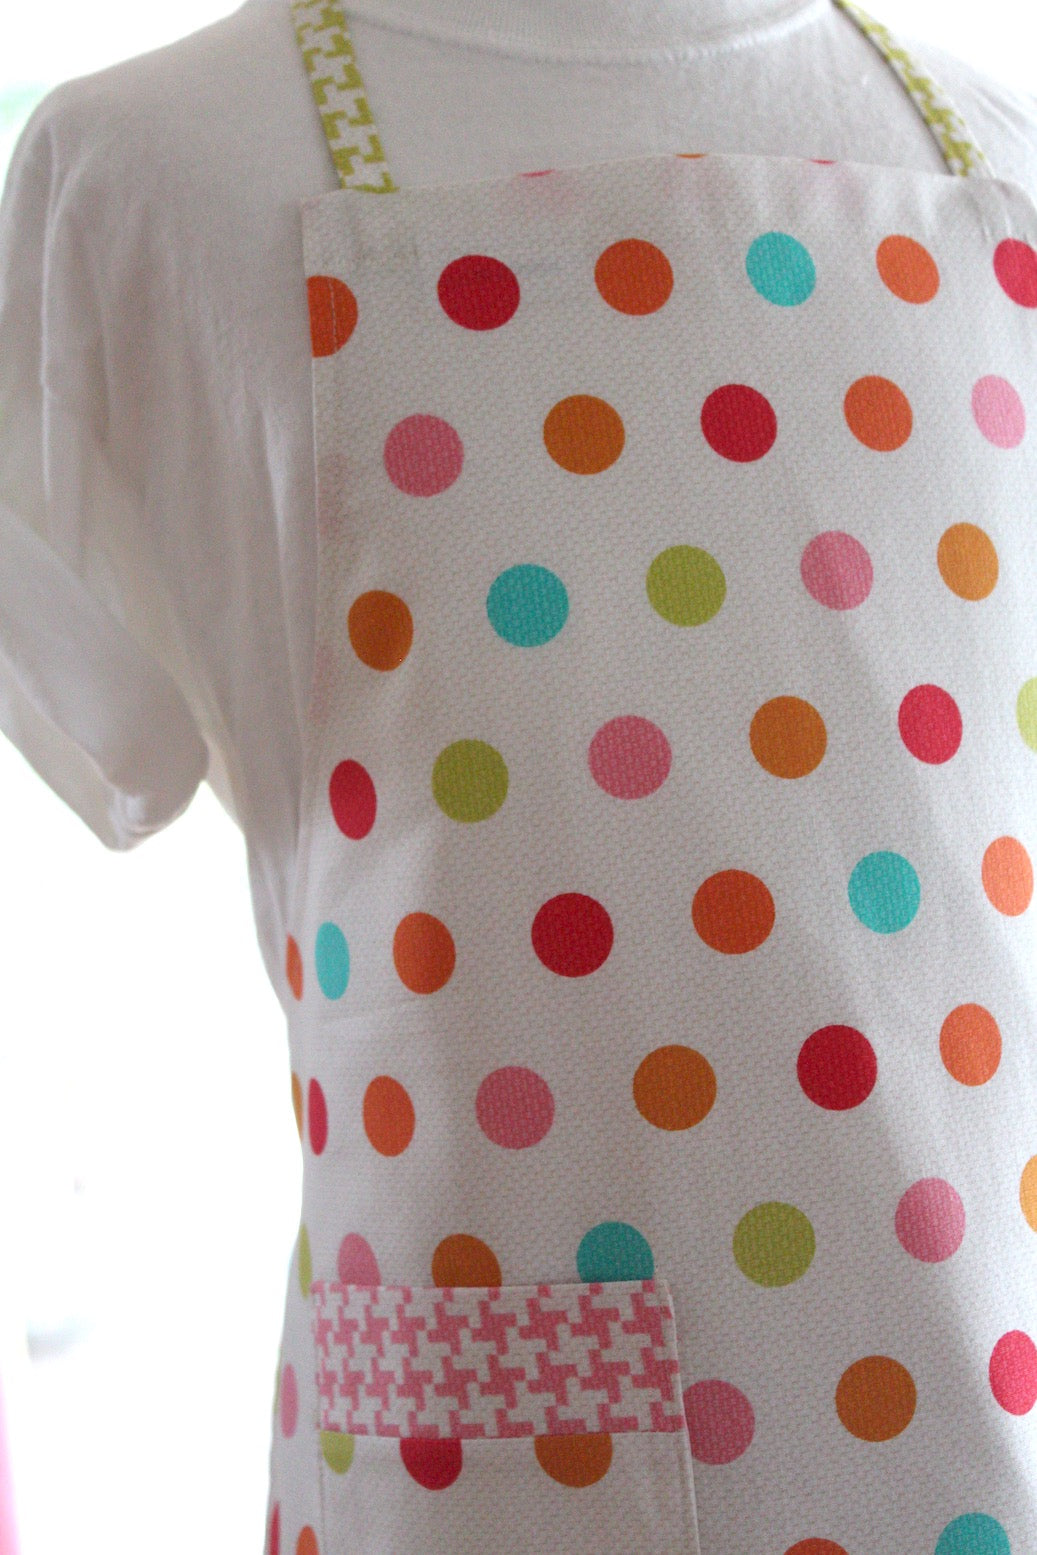 Candy Buttons Kid's Apron-The Blue Peony-Age Group_Kids,Category_Apron,Color_Aqua,Color_Cream,Color_Pink,Department_Kitchen,Gender_Girls,Material_Cotton,Pattern_Polka Dot,Size_Medium (ages 6-11),Size_Small (ages up to 5),Theme_Spring